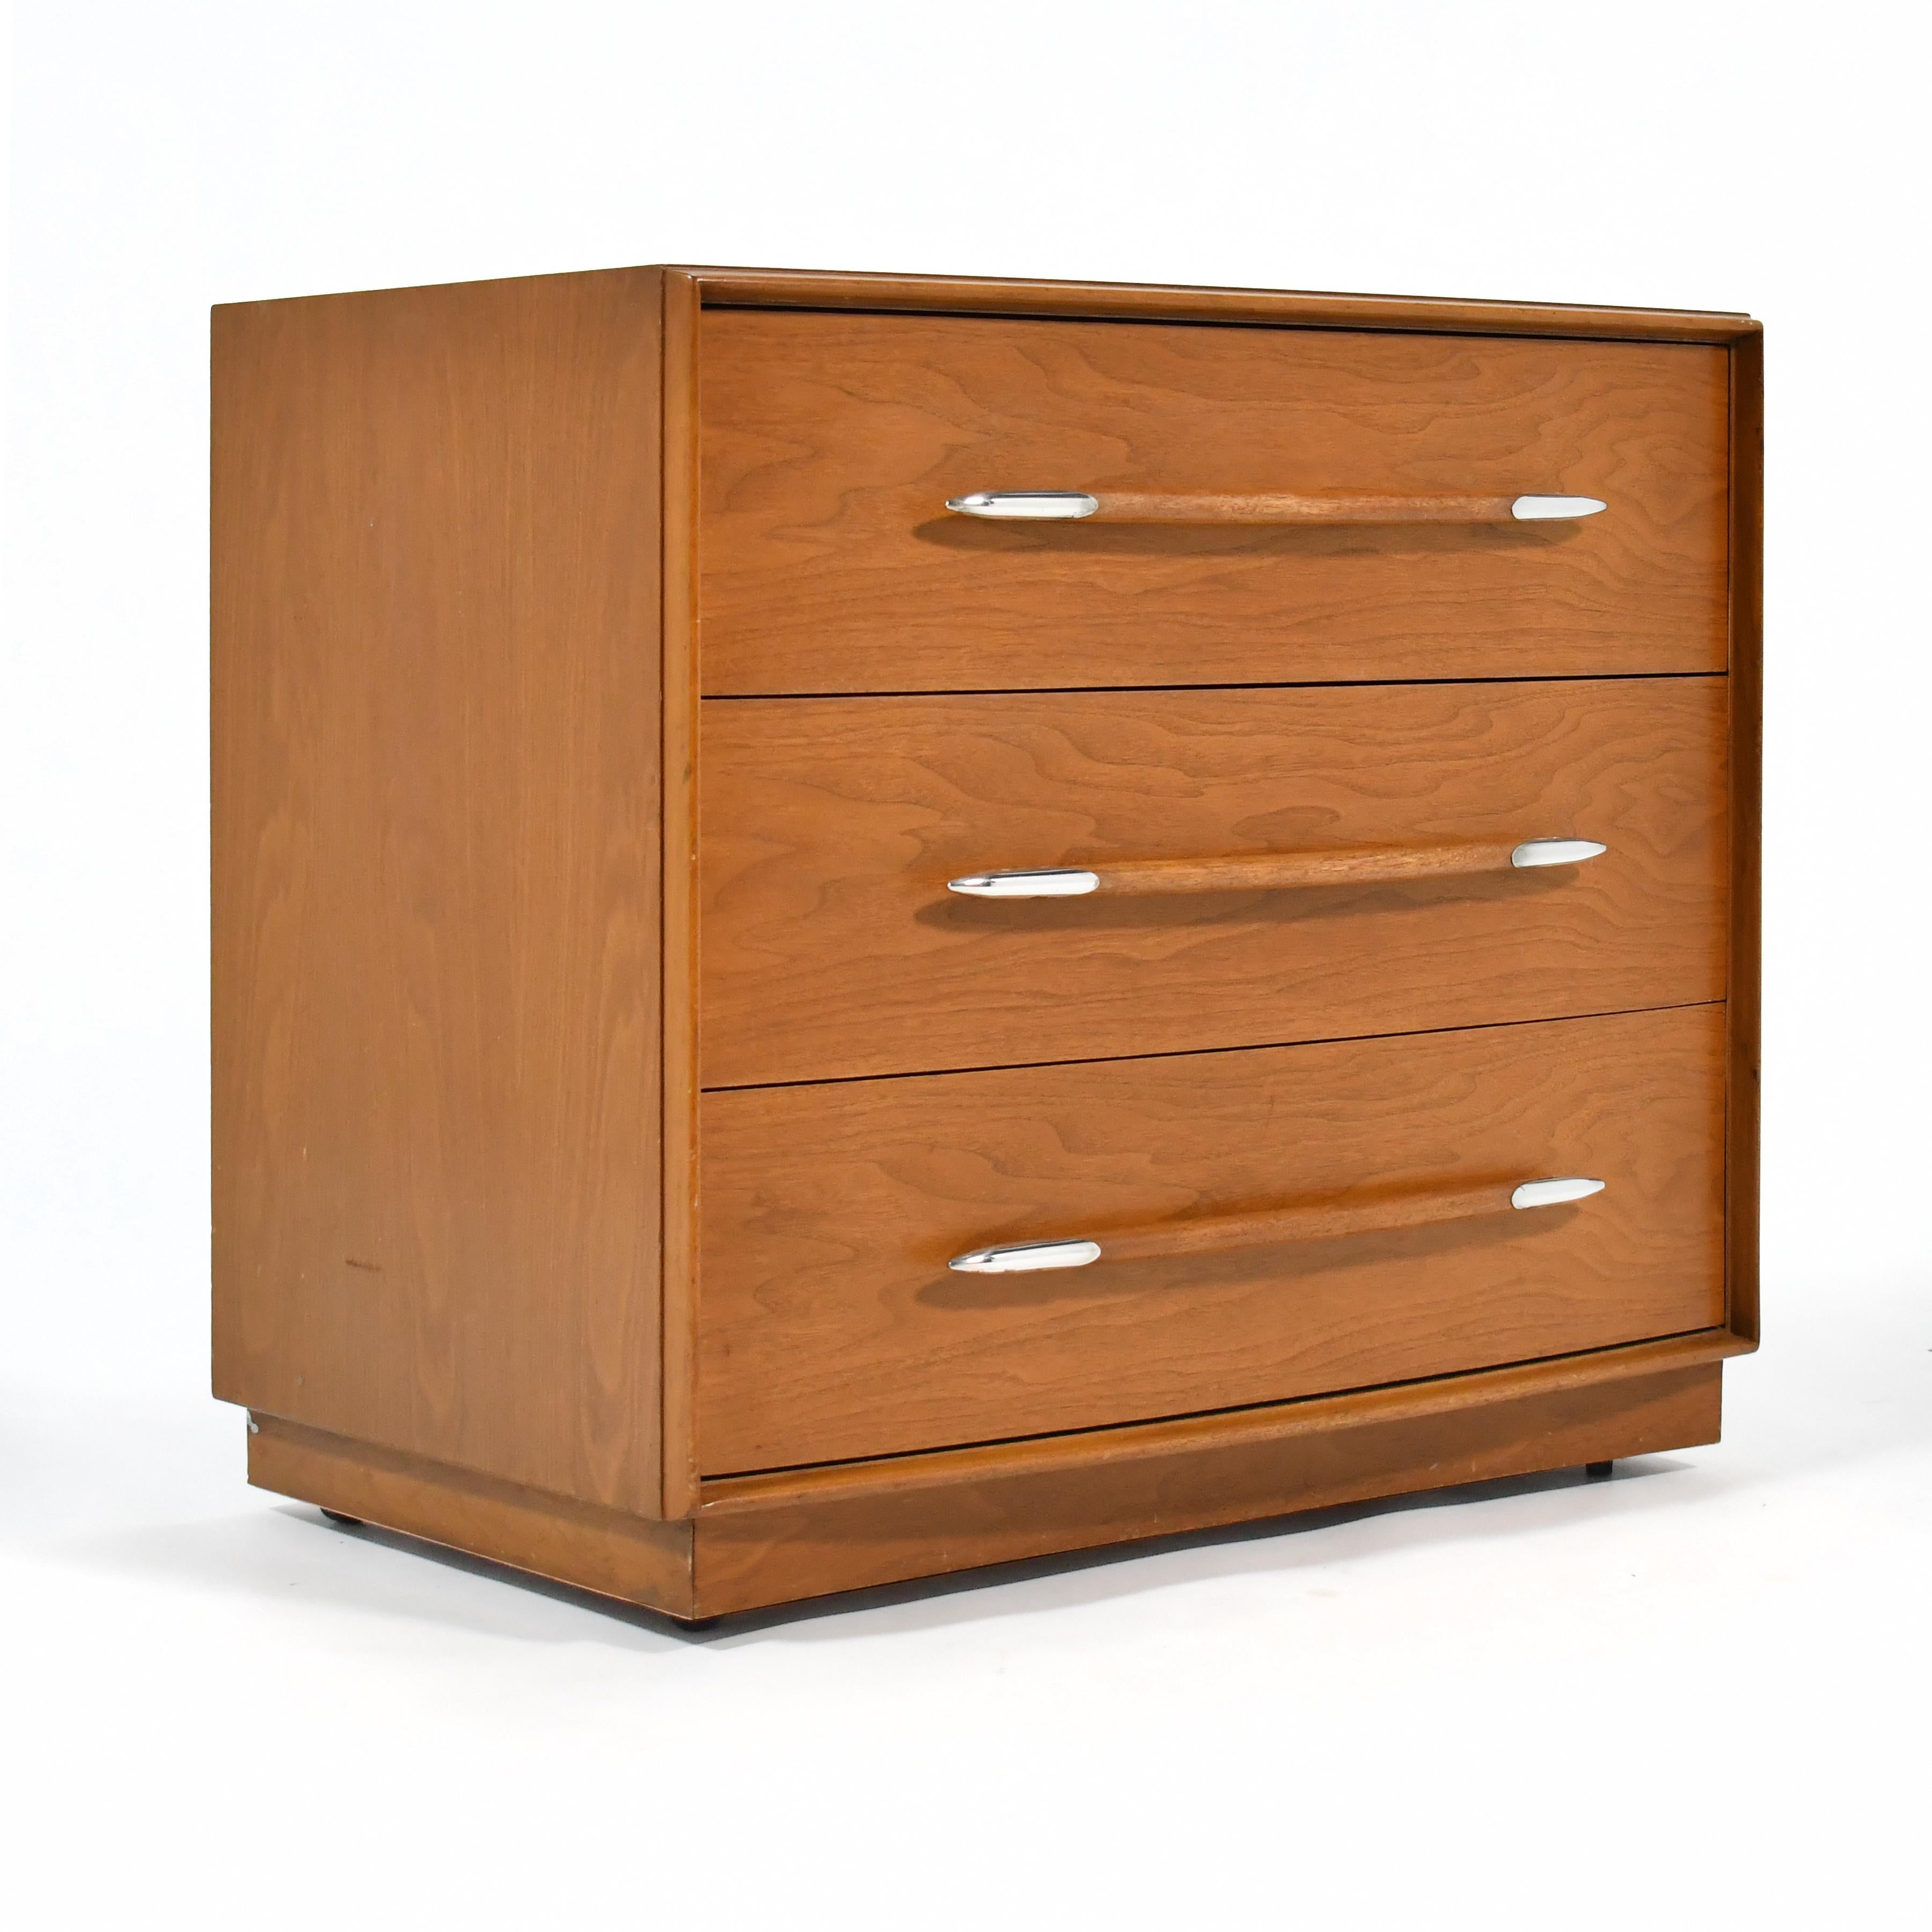 This stunning dresser by T.H. Robsjohn-Gibbings for Widdicomb is impeccably designed and expertly crafted. The walnut case has is exquisitely detailed with the curved front and elegant spear-shaped silver pulls.

30.25